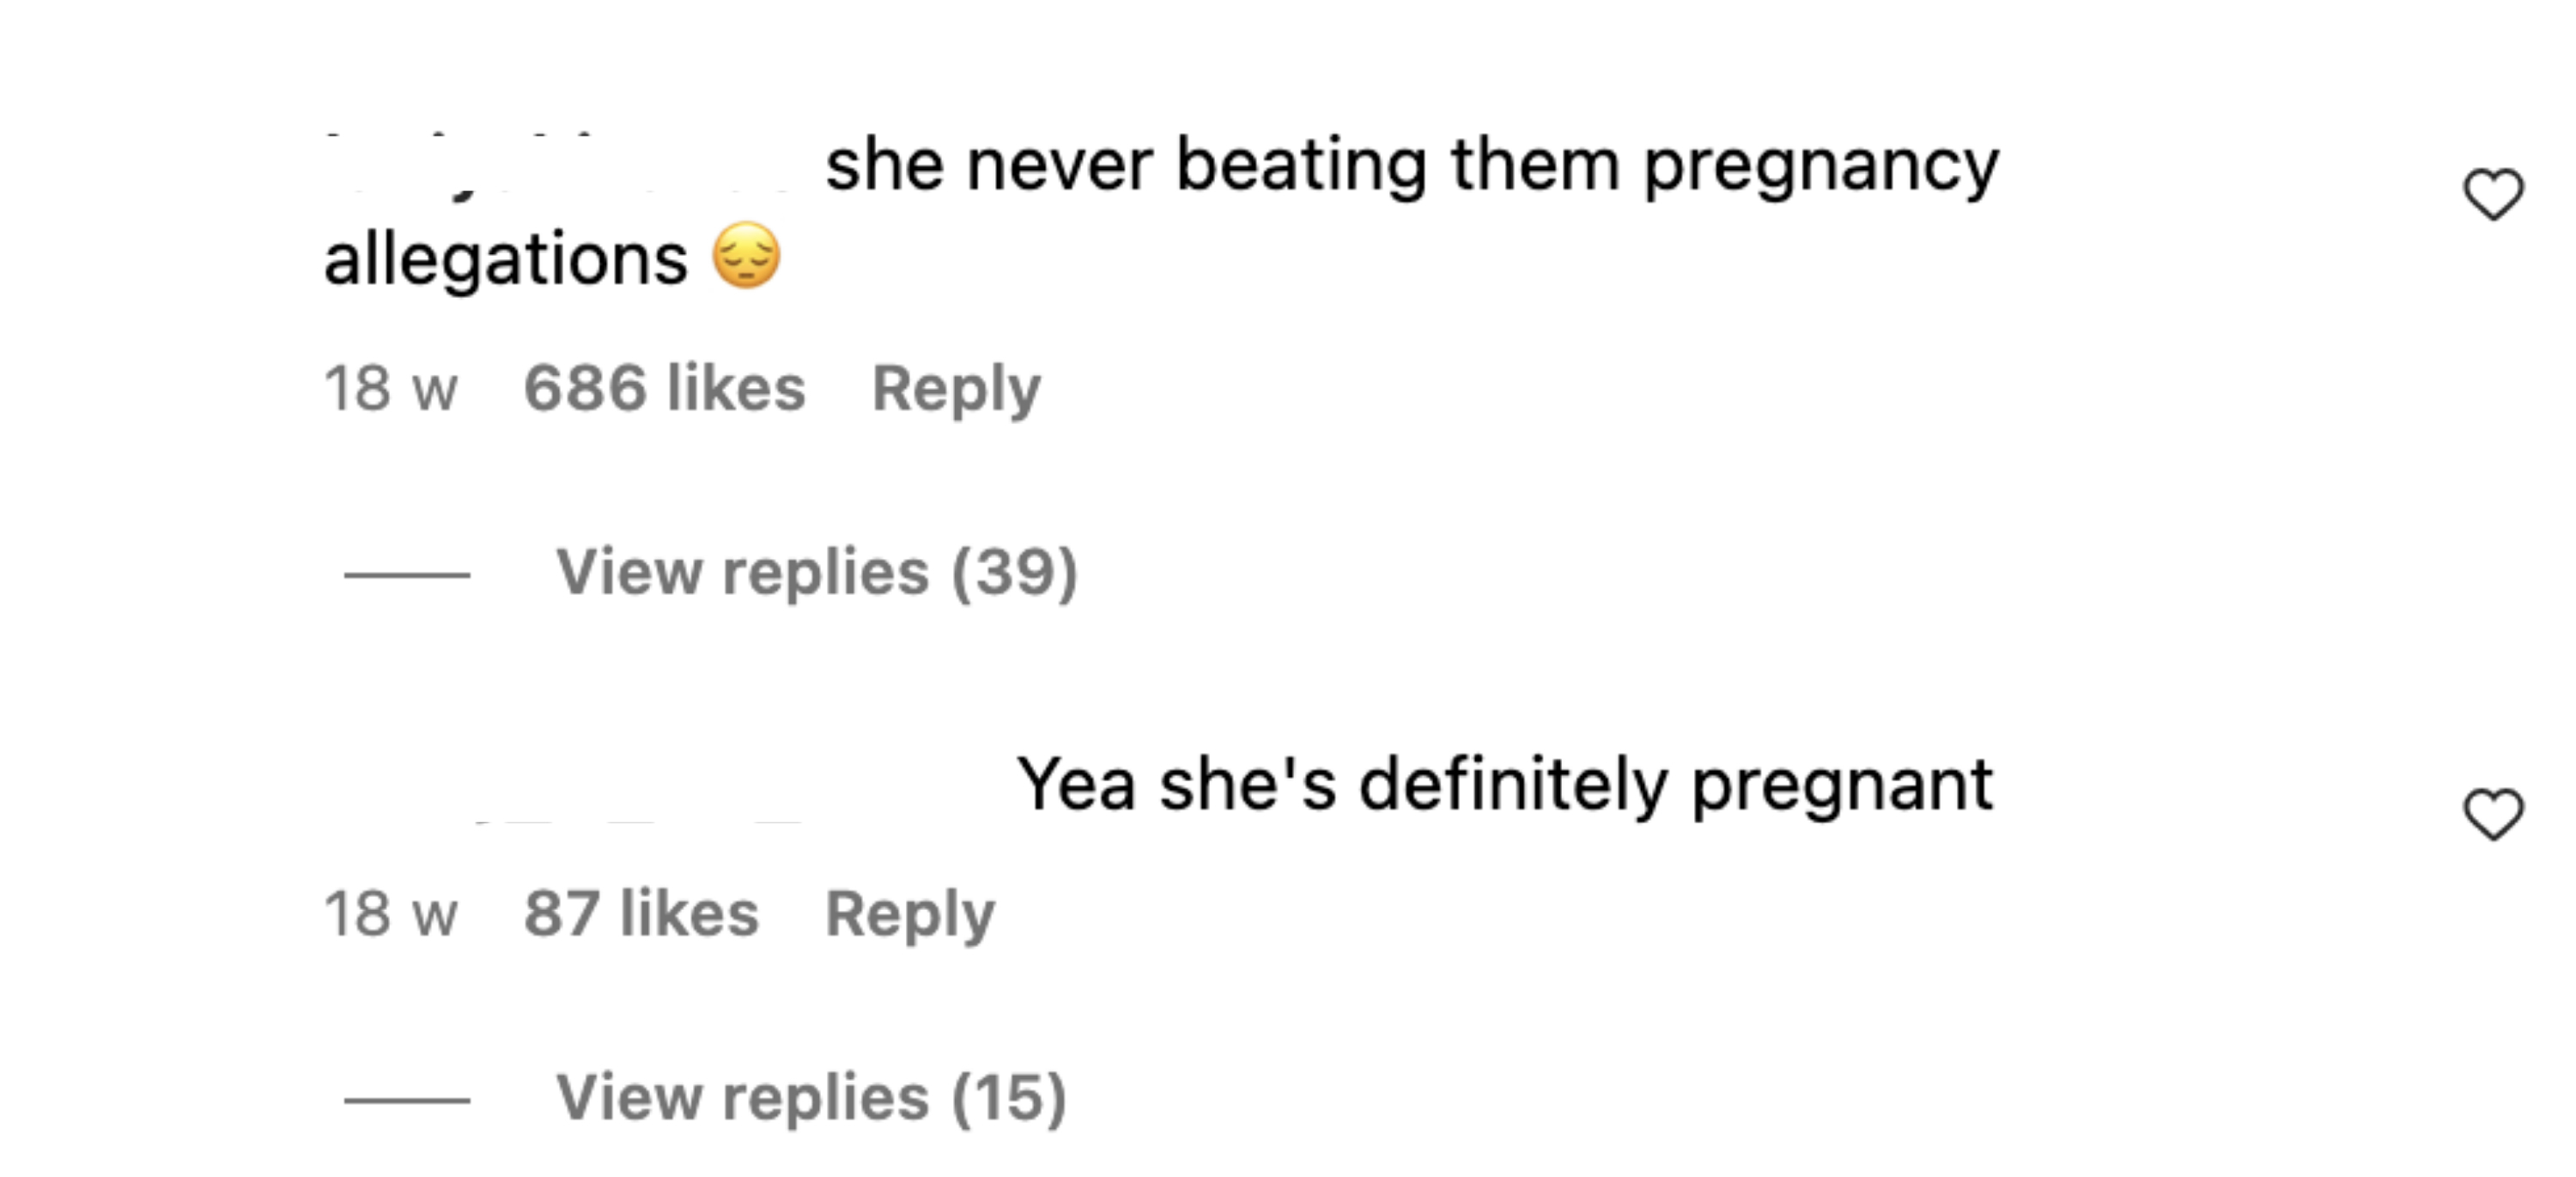 She never beating them pregnancy allegations